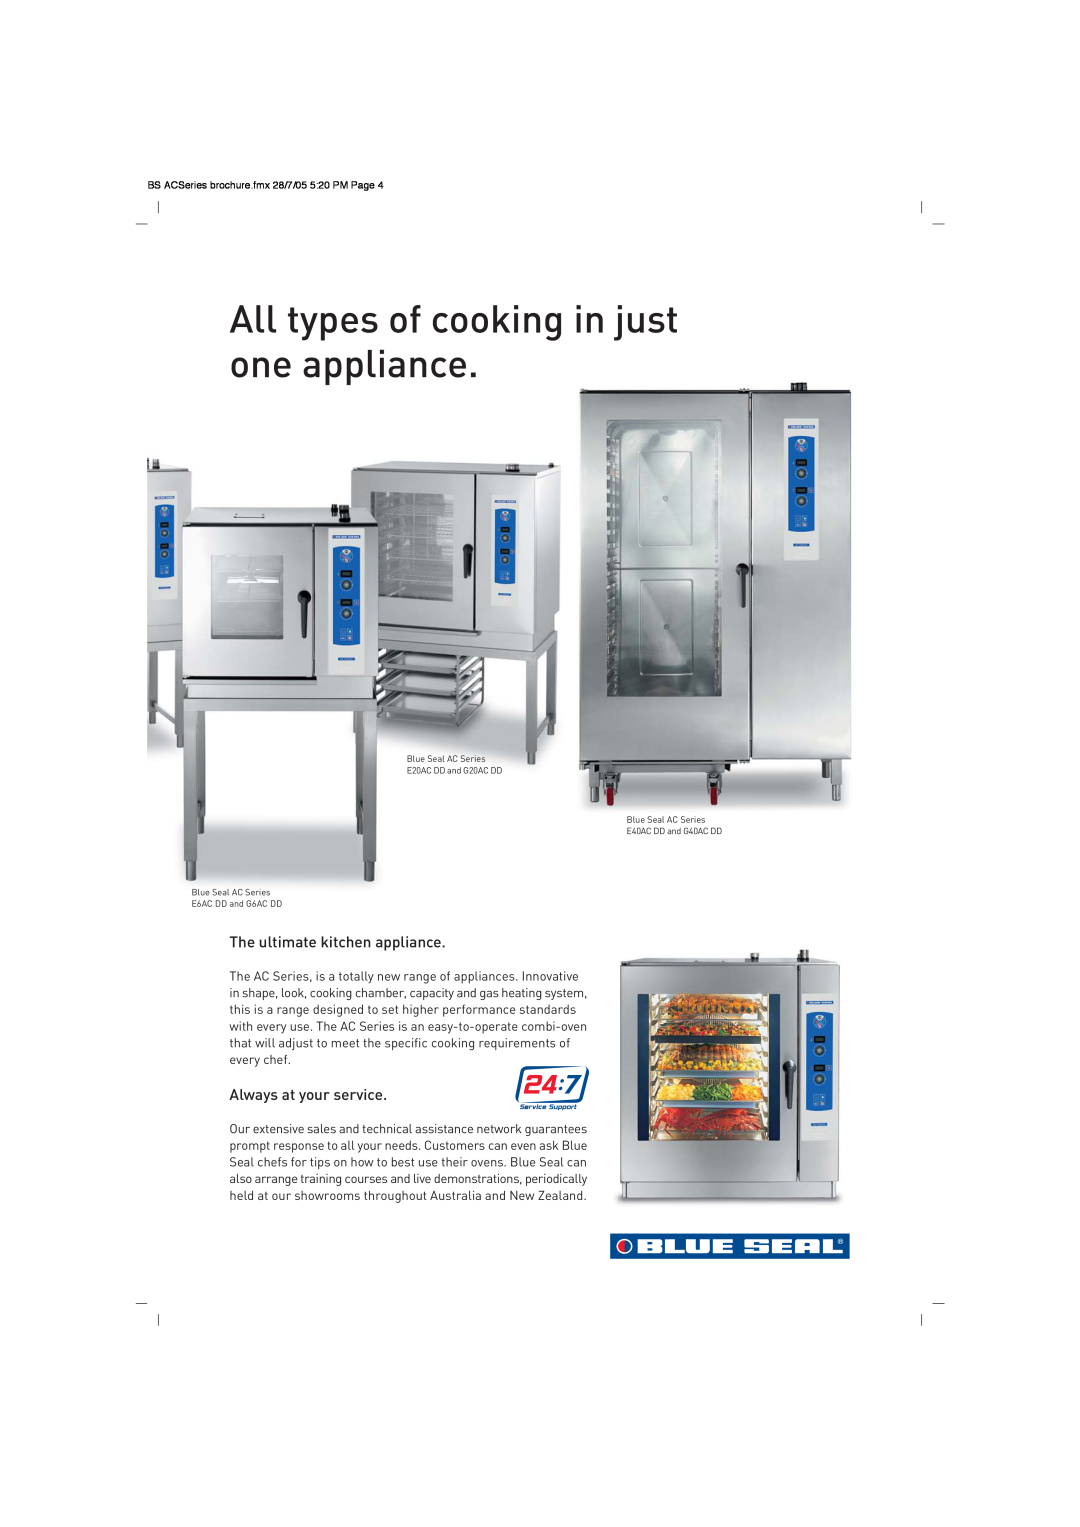 Moffat AC Series All types of cooking in just one appliance, The ultimate kitchen appliance, Always at your service 